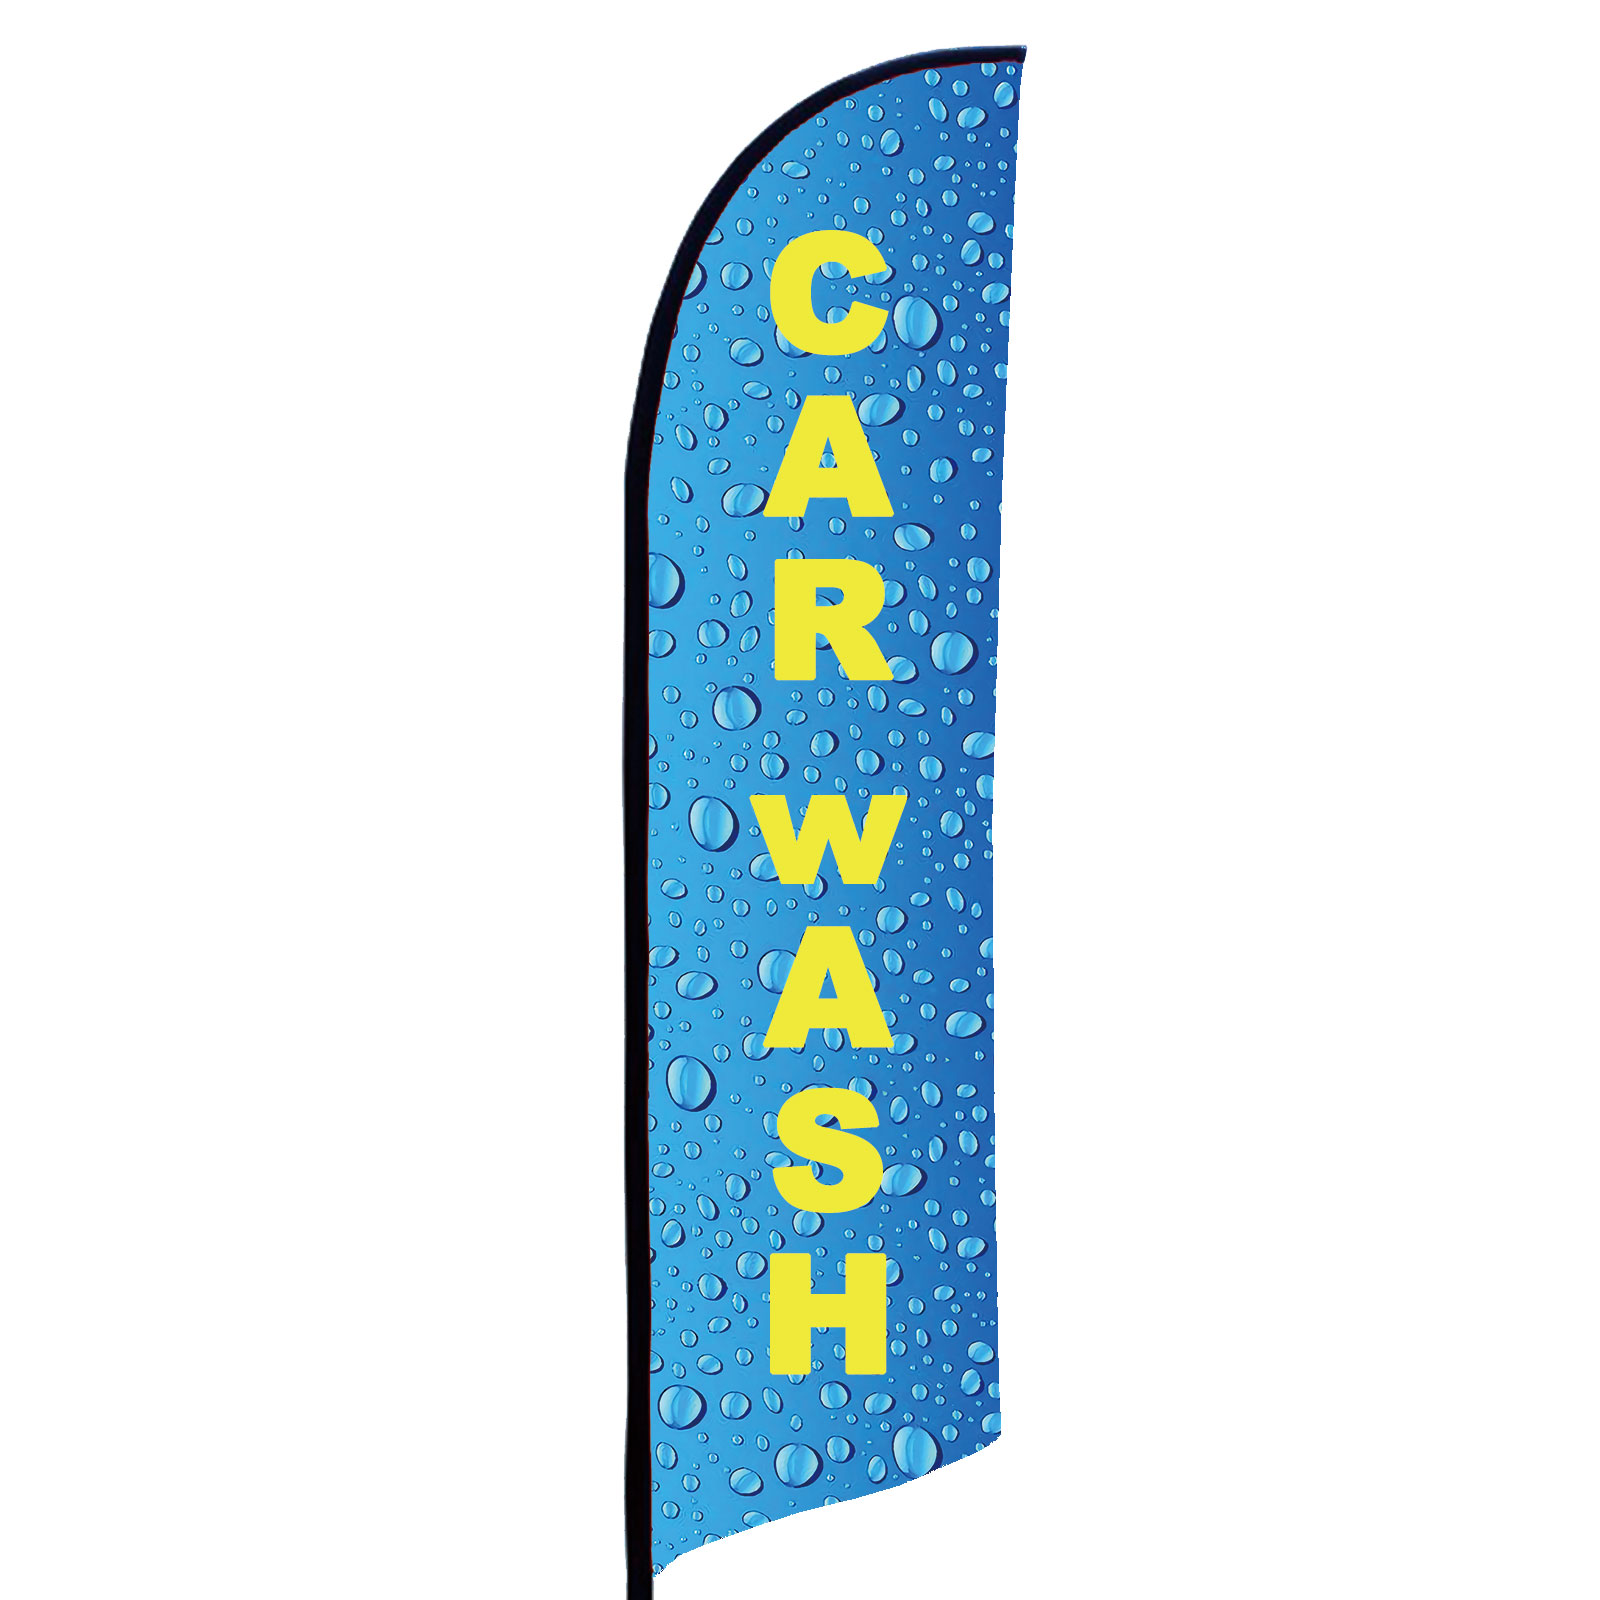 CAR WASH Advertising Feather Flags for Business(flag only)